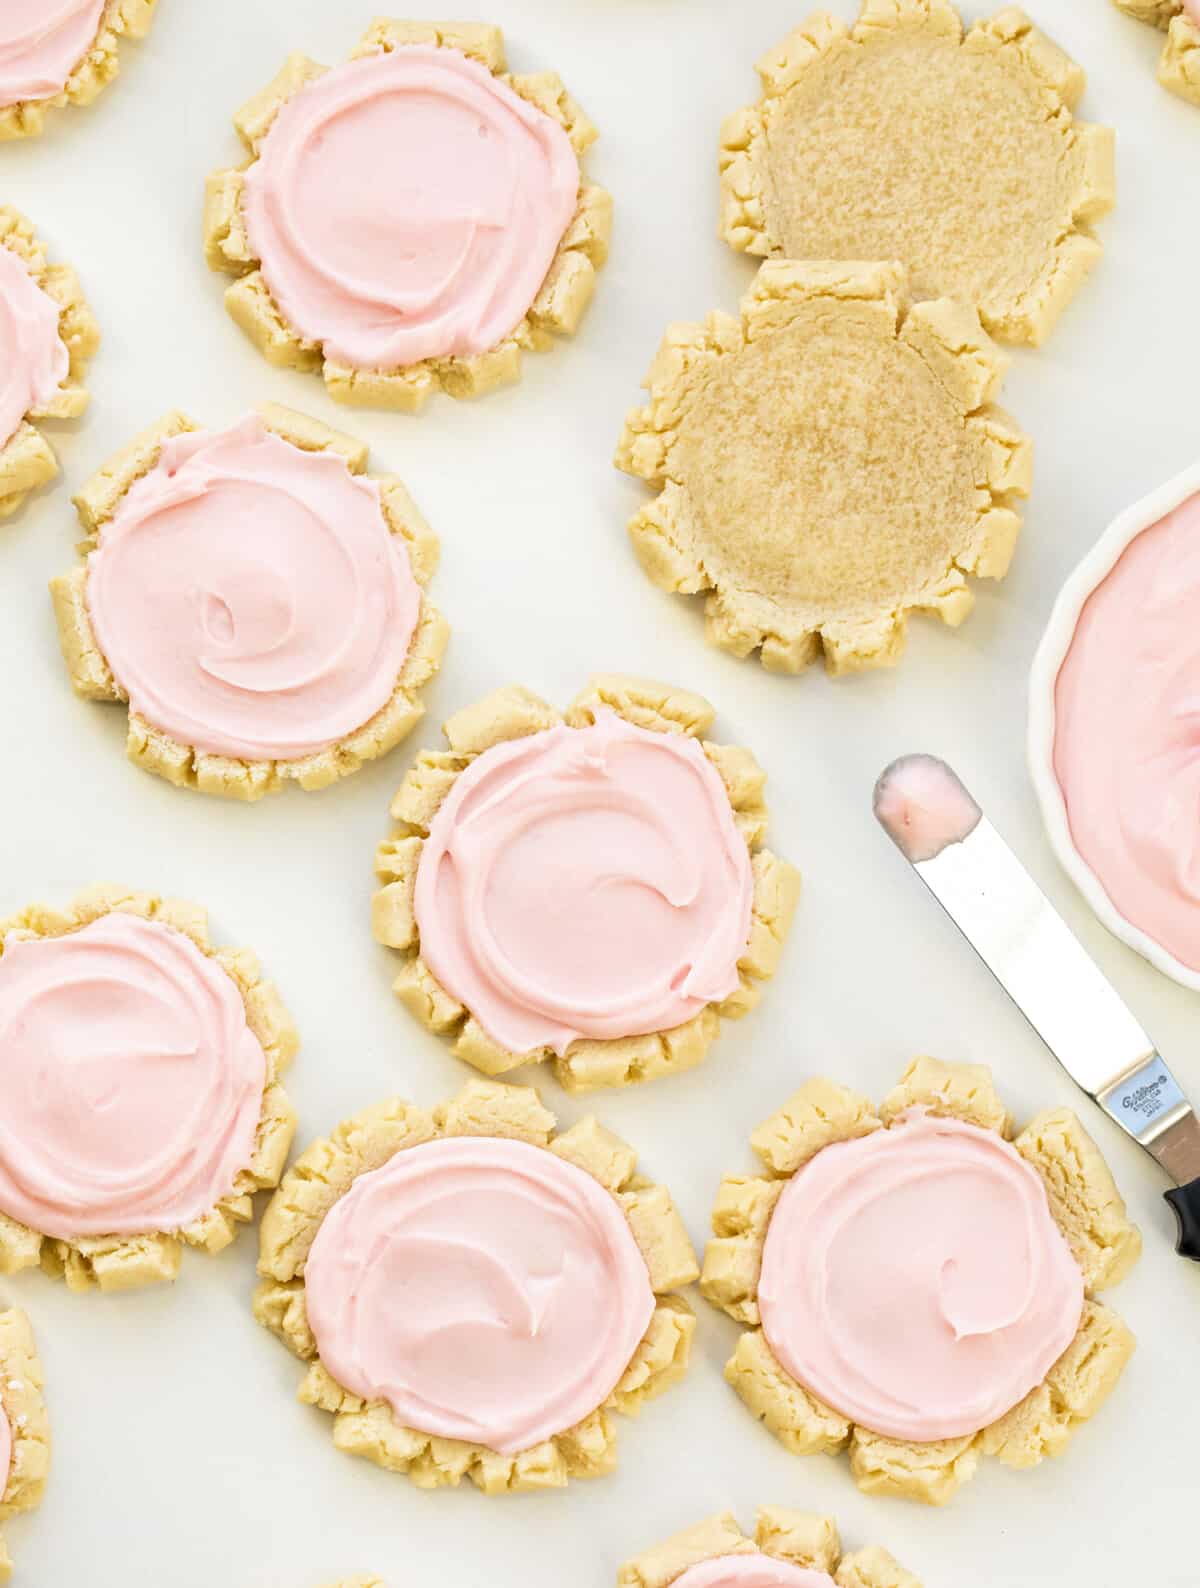 Frosted Sugar Cookies from Overhead with a Few Cookies not Frosted. Dessert, Cookies, Cookie Recipes, Swig Copycat, Baking, Cookie Exchange, Frosted Cookies, iambaker cookie recipes, the best sugar cookies, sugar cookie, i am baker, iambaker